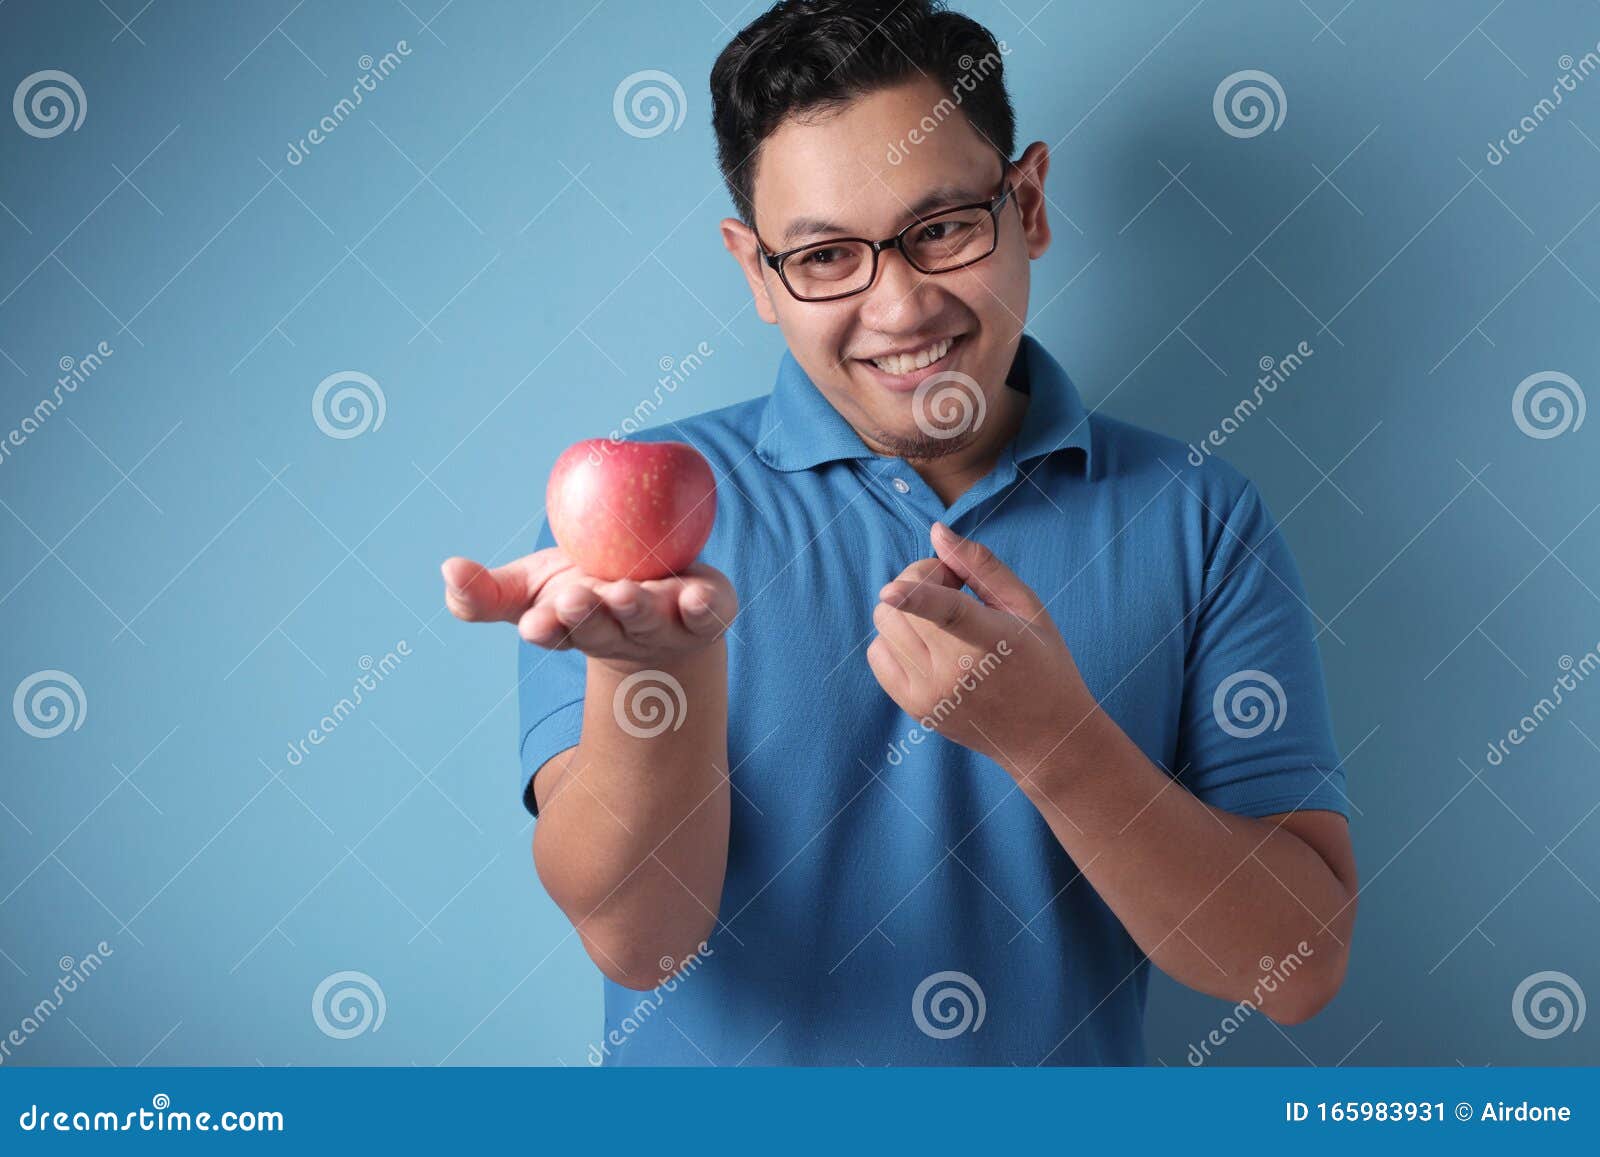 Funny Man Eating Red Apple stock image. Image of blue - 165983931